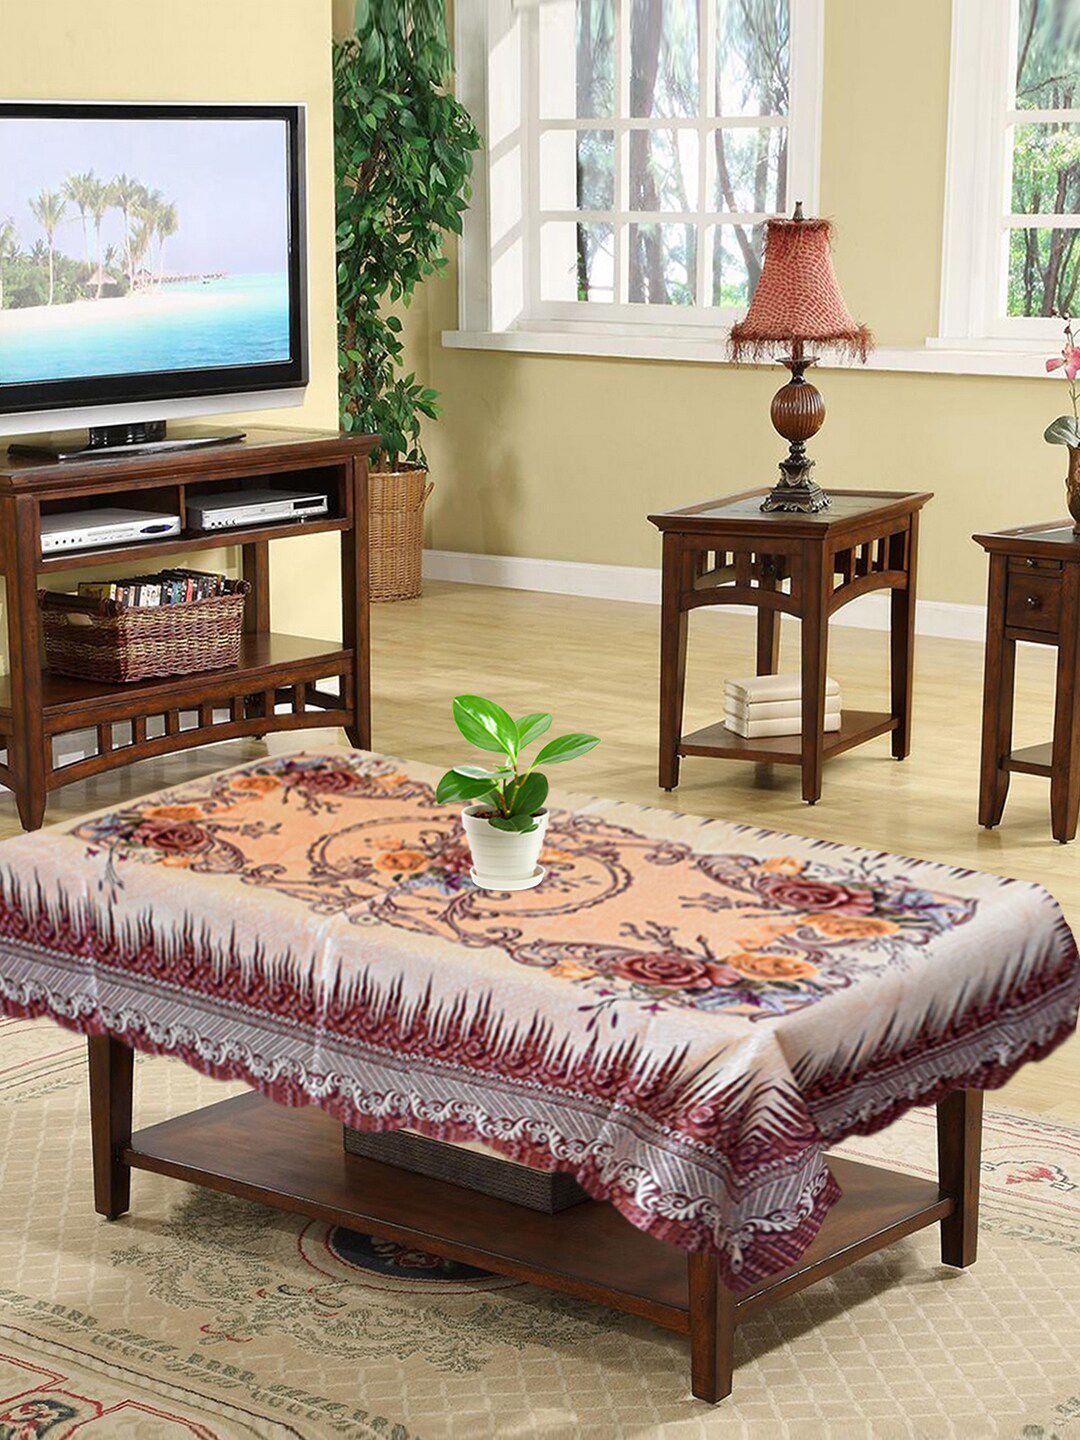 Kuber Industries Cream & Maroon Floral Printed 4 Seater Rectangle Table Cover Price in India